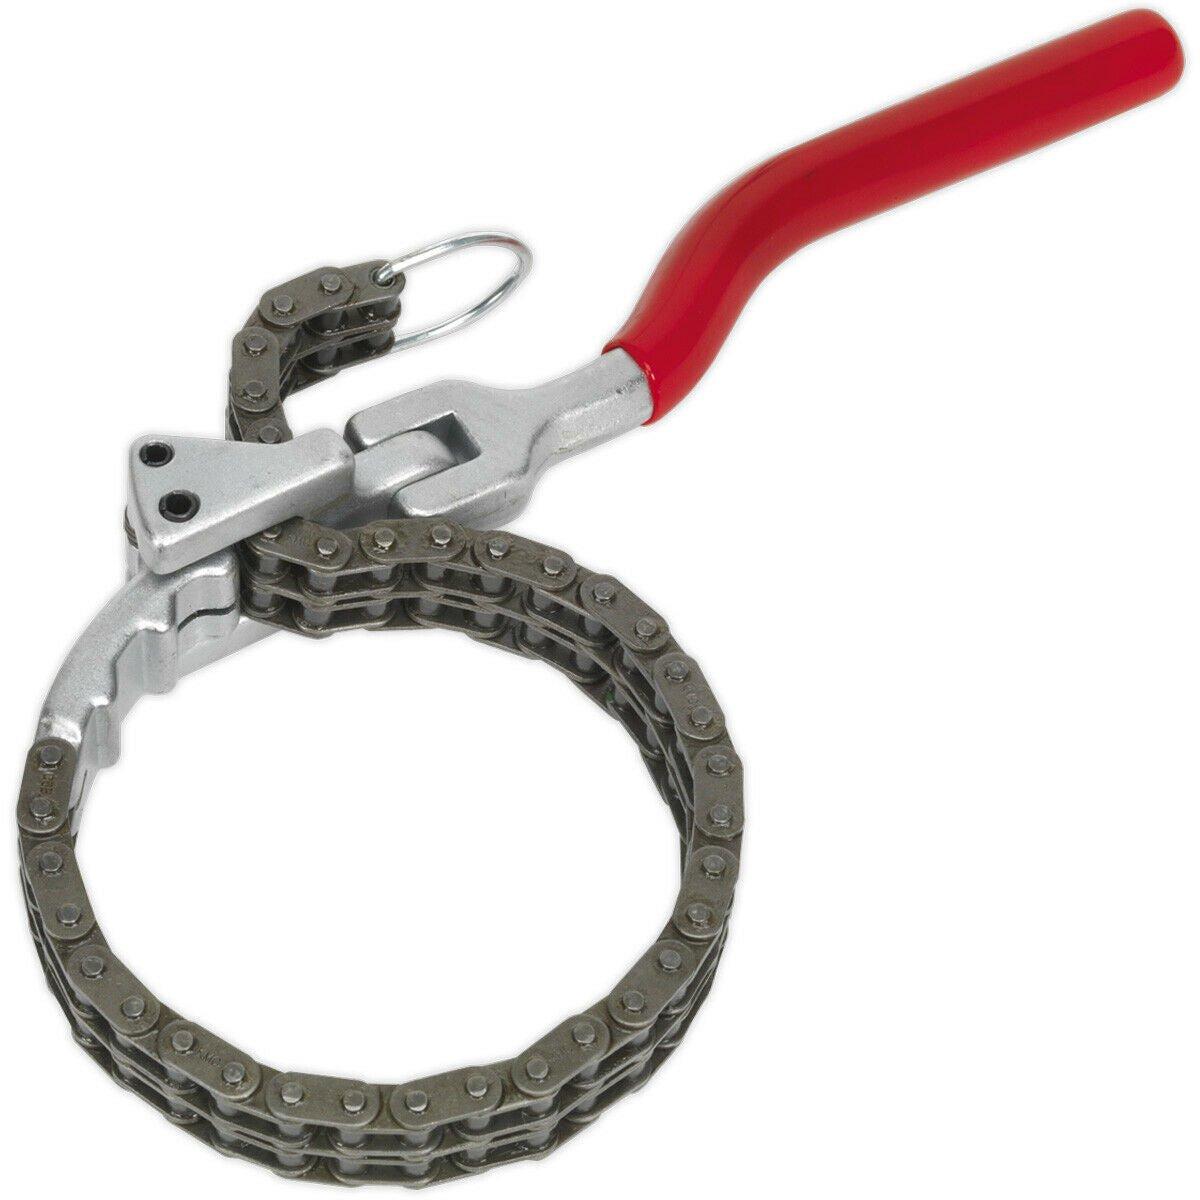 Steel Oil Filter Chain Wrench - 60mm to 105mm - 180 Degree Pivoting Handle